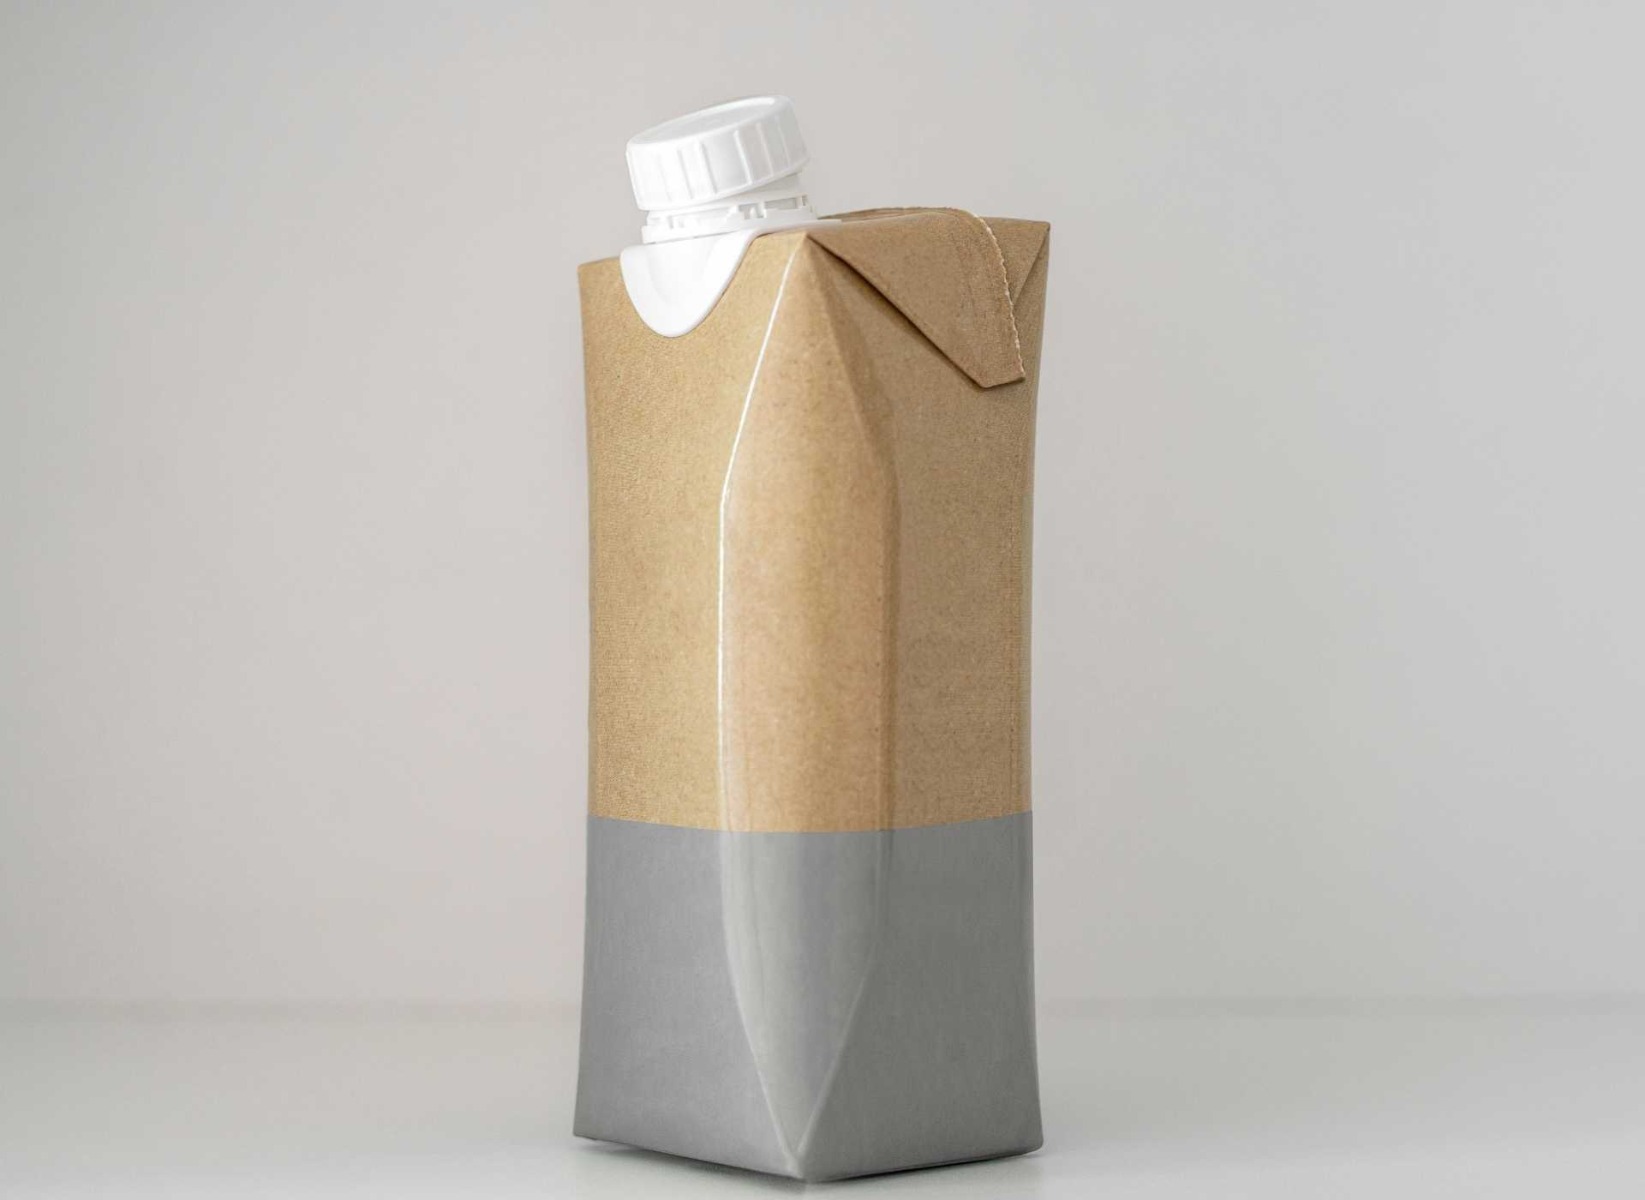 Sustainable packaging of a paper bottle